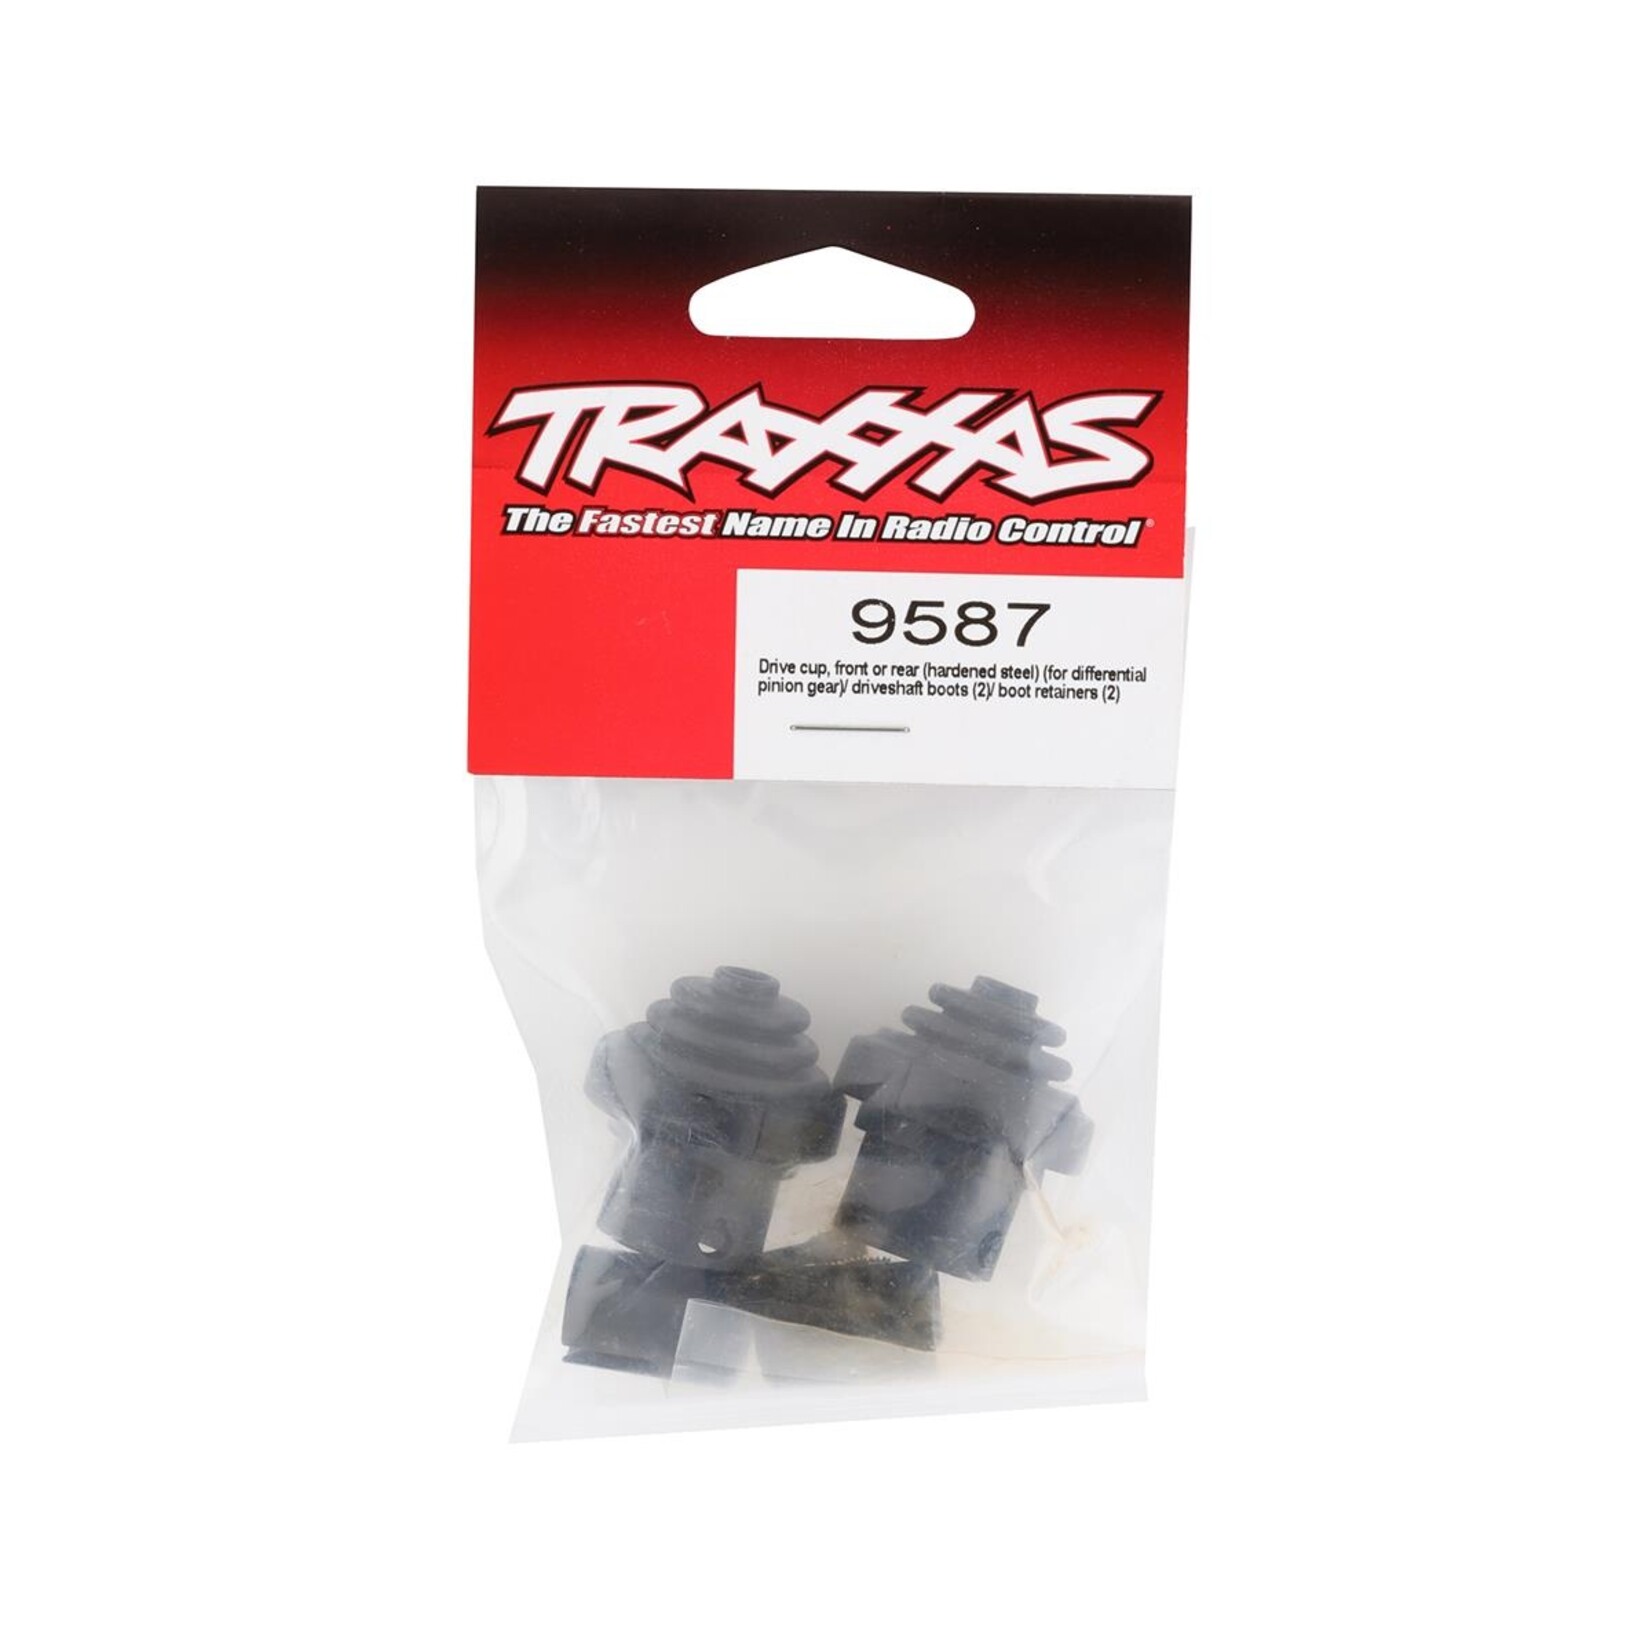 Traxxas Traxxas Sledge Drive Cups & Steel Differential Pinion w/Boots #9587